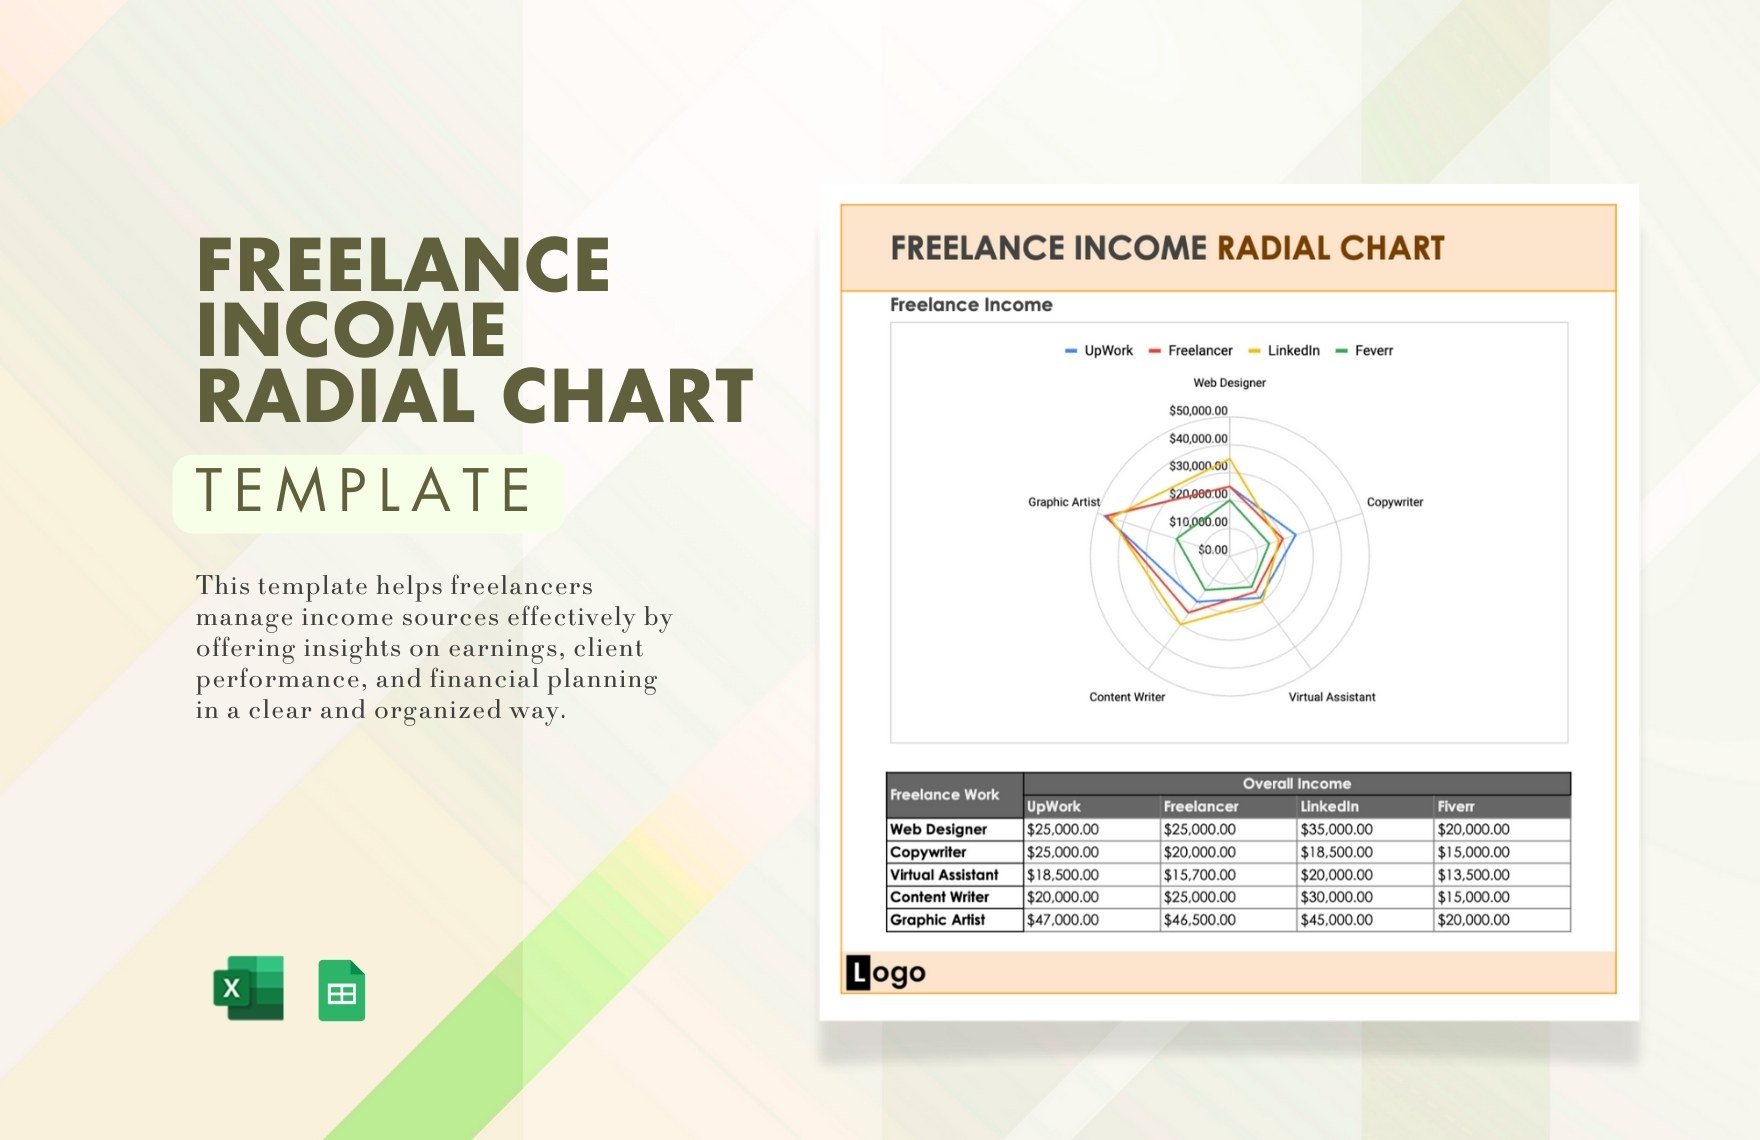 Freelance Income Radial Chart in Excel, Google Sheets